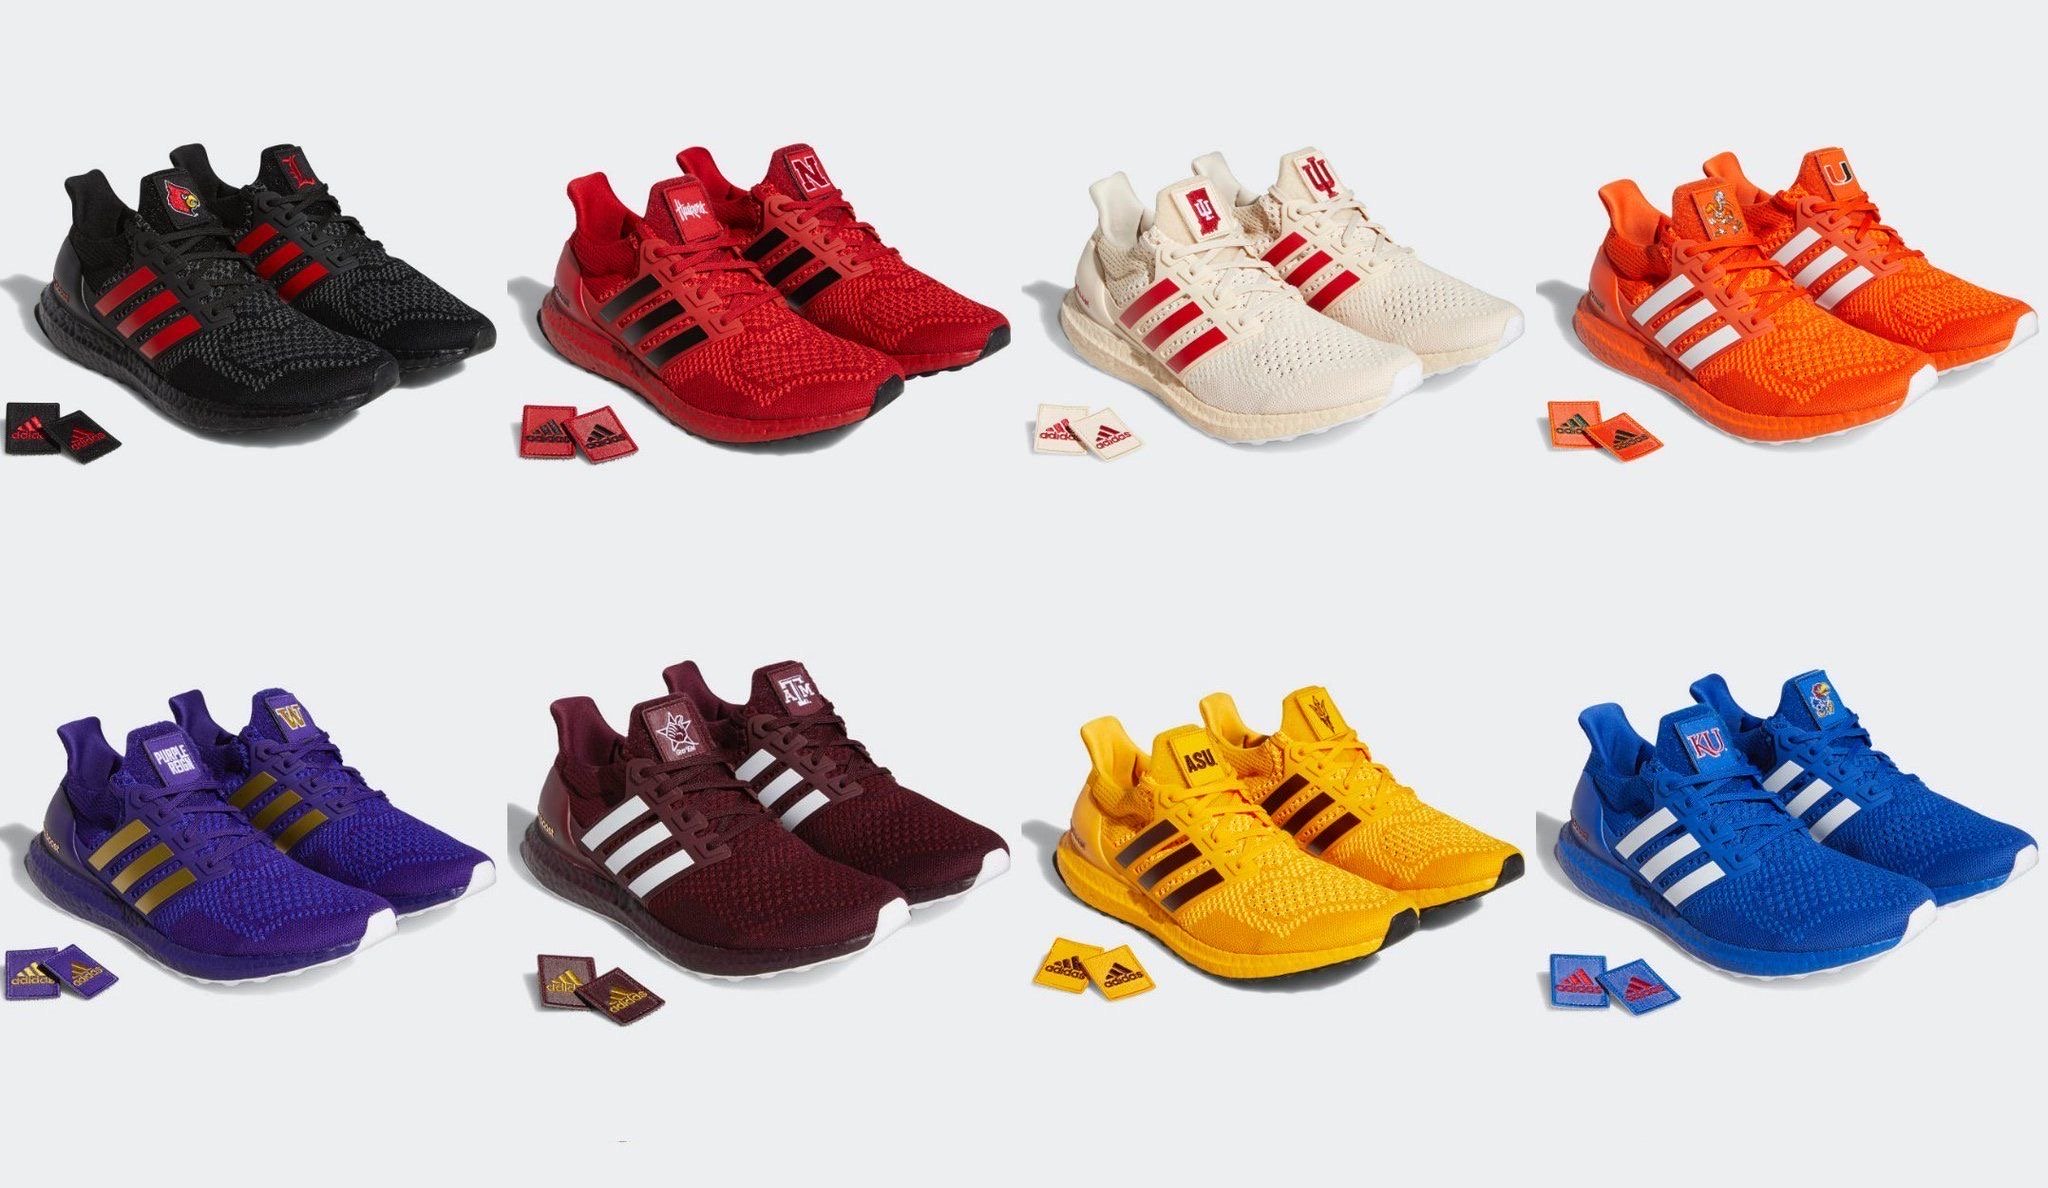 Adidas Ultra Boost 1.0 “NCAA Pack” - Made for the W